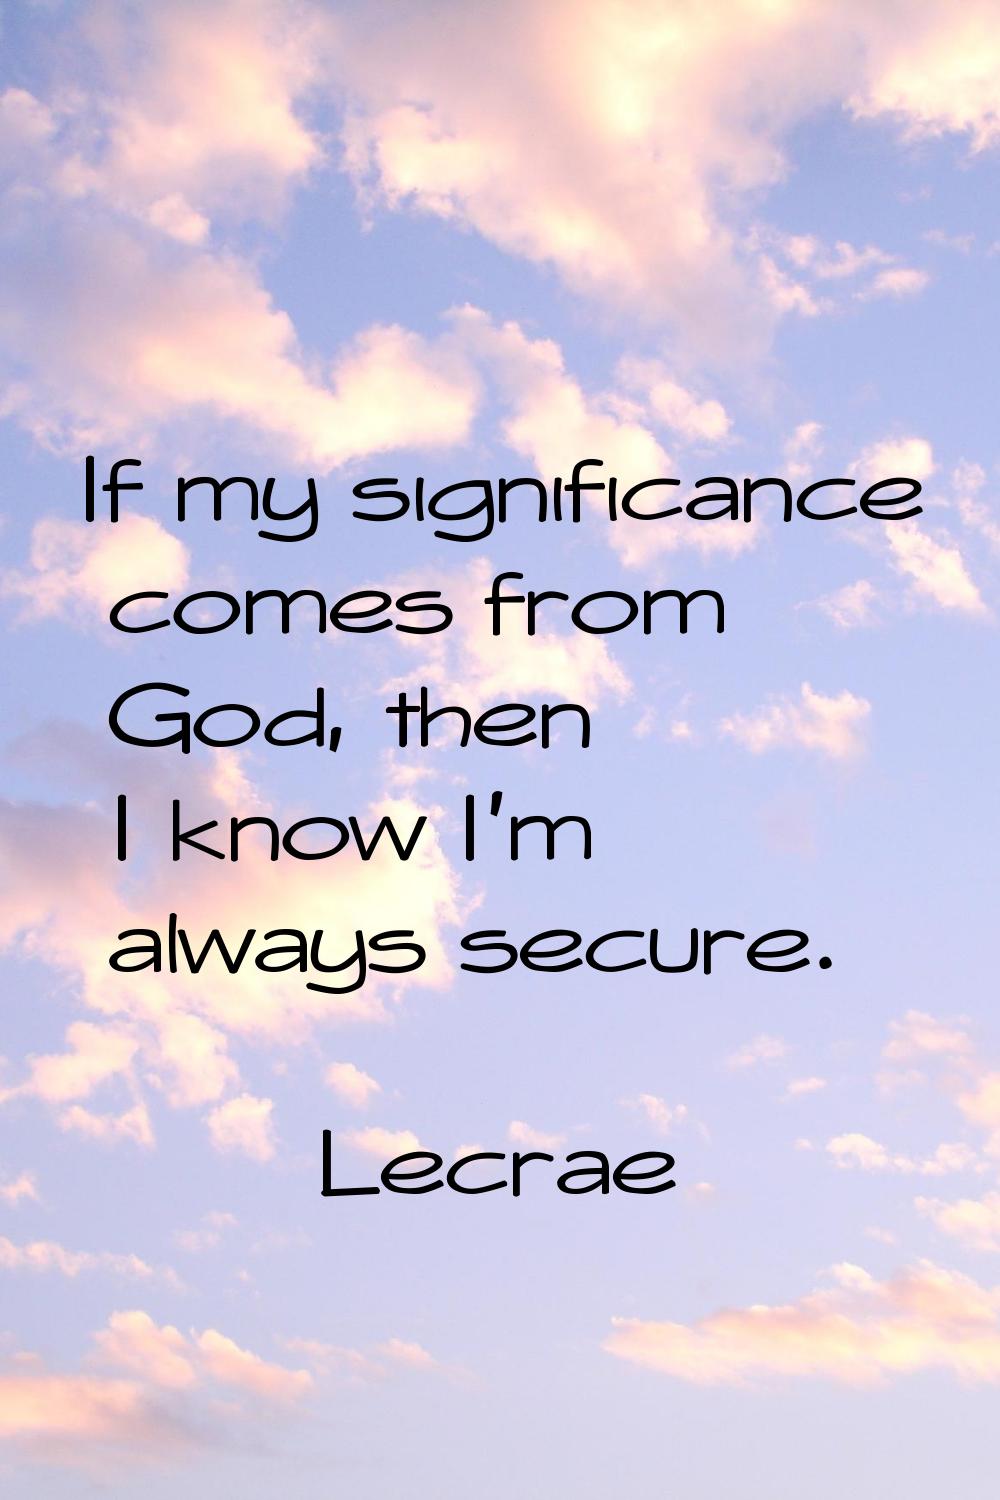 If my significance comes from God, then I know I'm always secure.